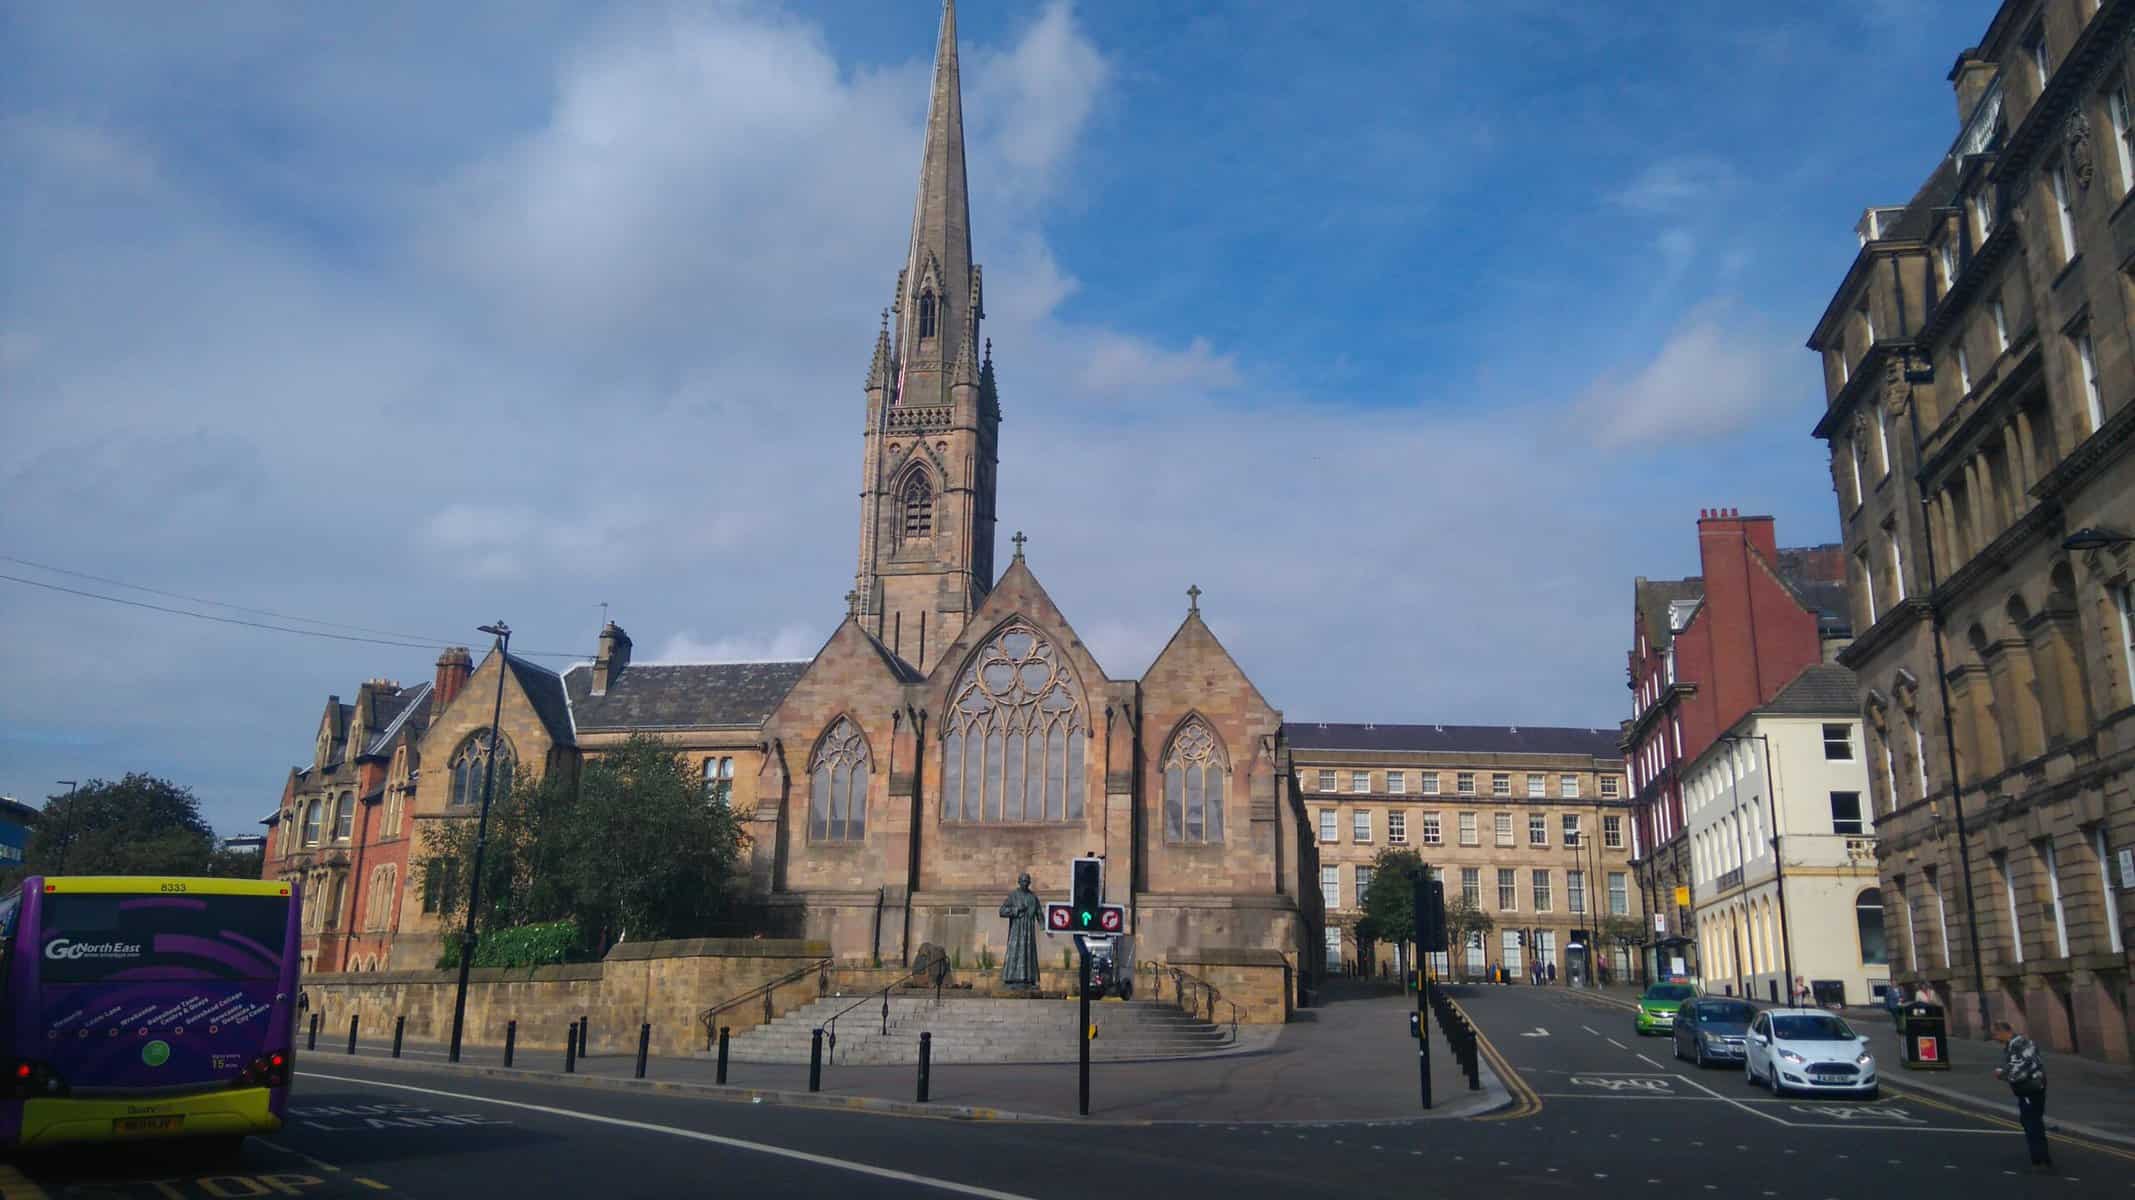 St Mary's Cathedral in Newcastle is shown from the street.